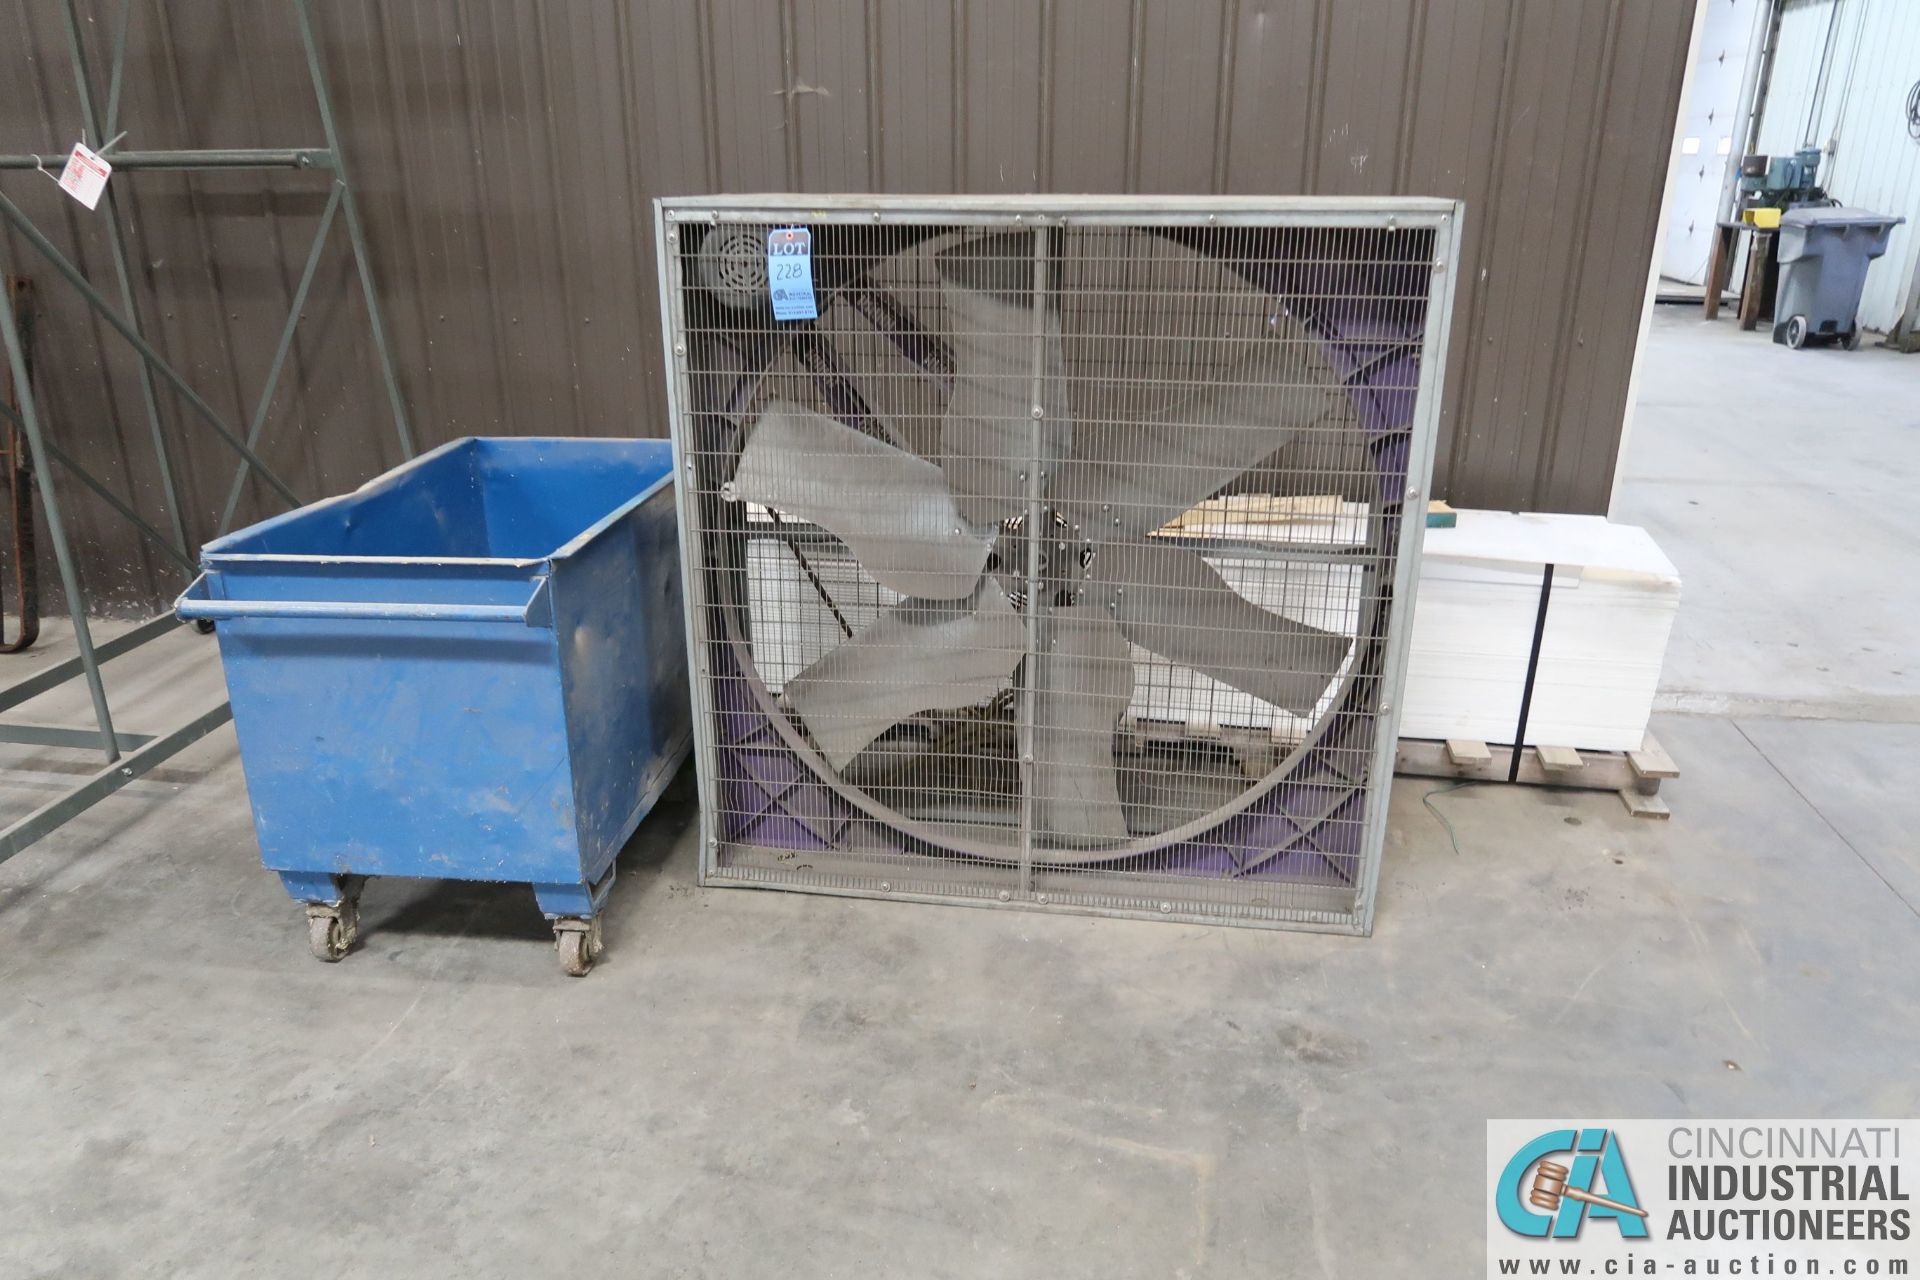 (LOT) 48" BOX FAN, STEEL CONTAINER AND SKID OF 15" WIDE PLASTIC SHEET